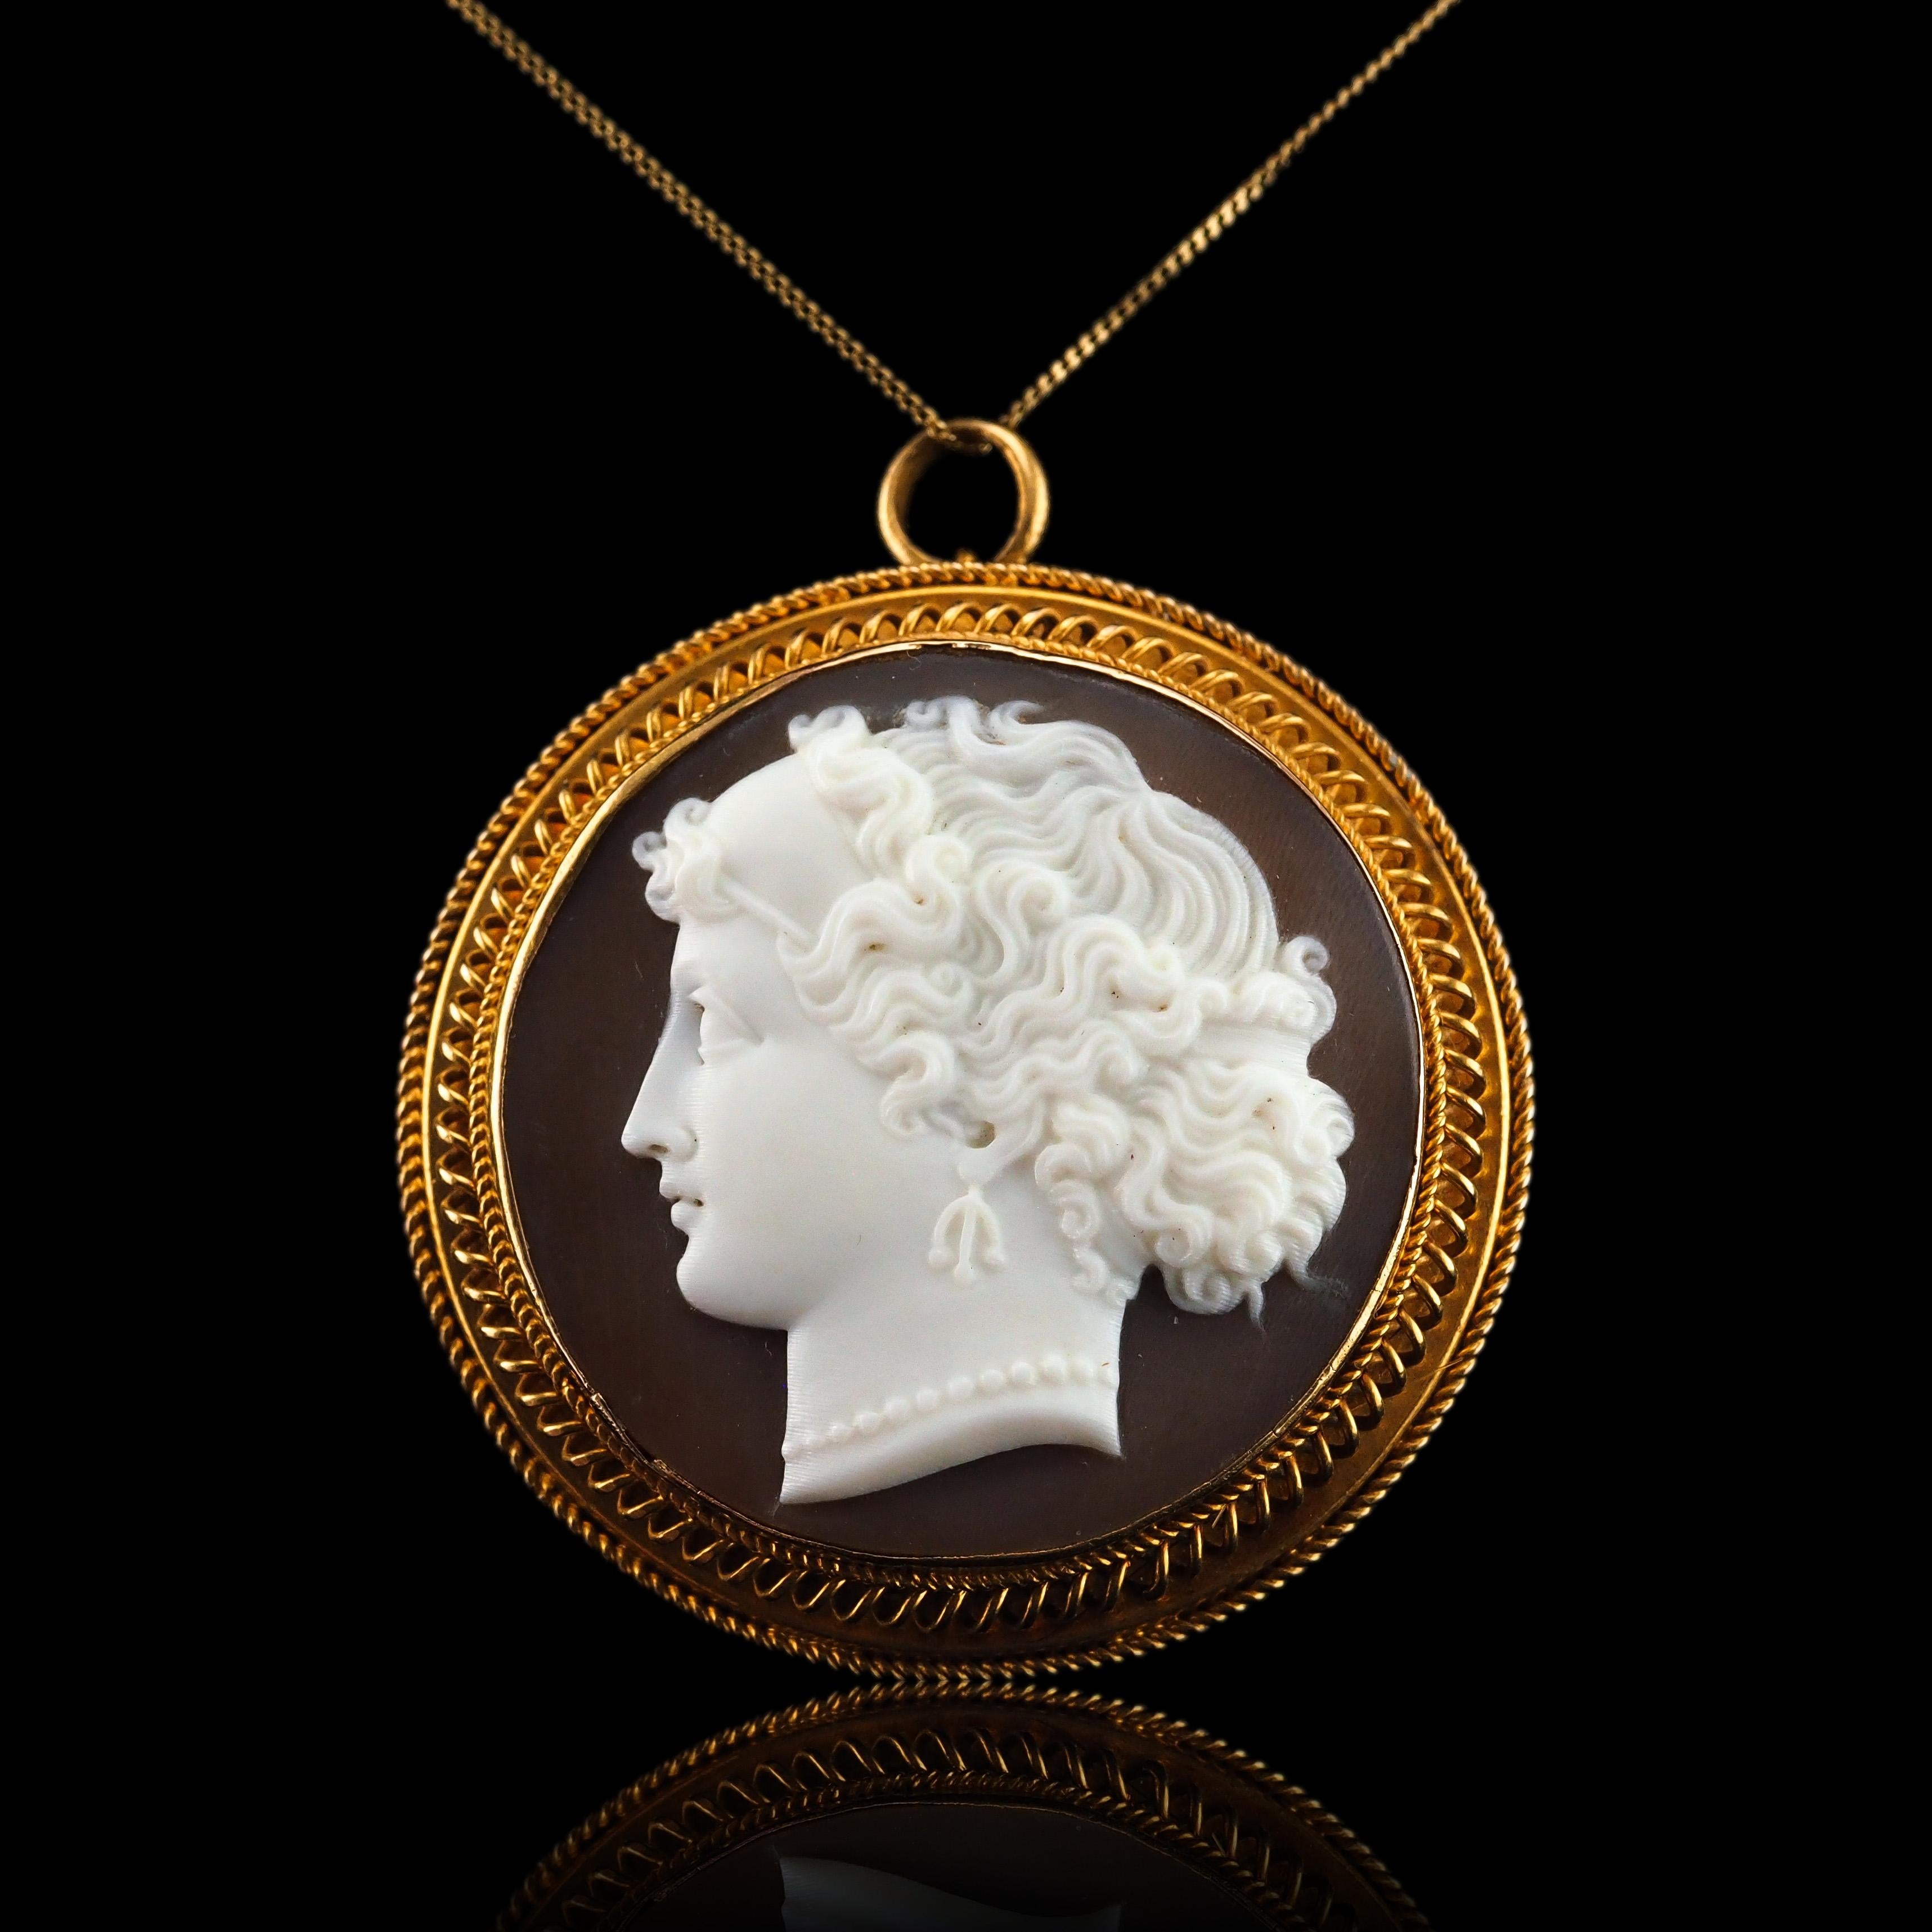 Antique Victorian Cameo 18K Gold Brooch/Pendant Necklace - c.1880 For Sale 11